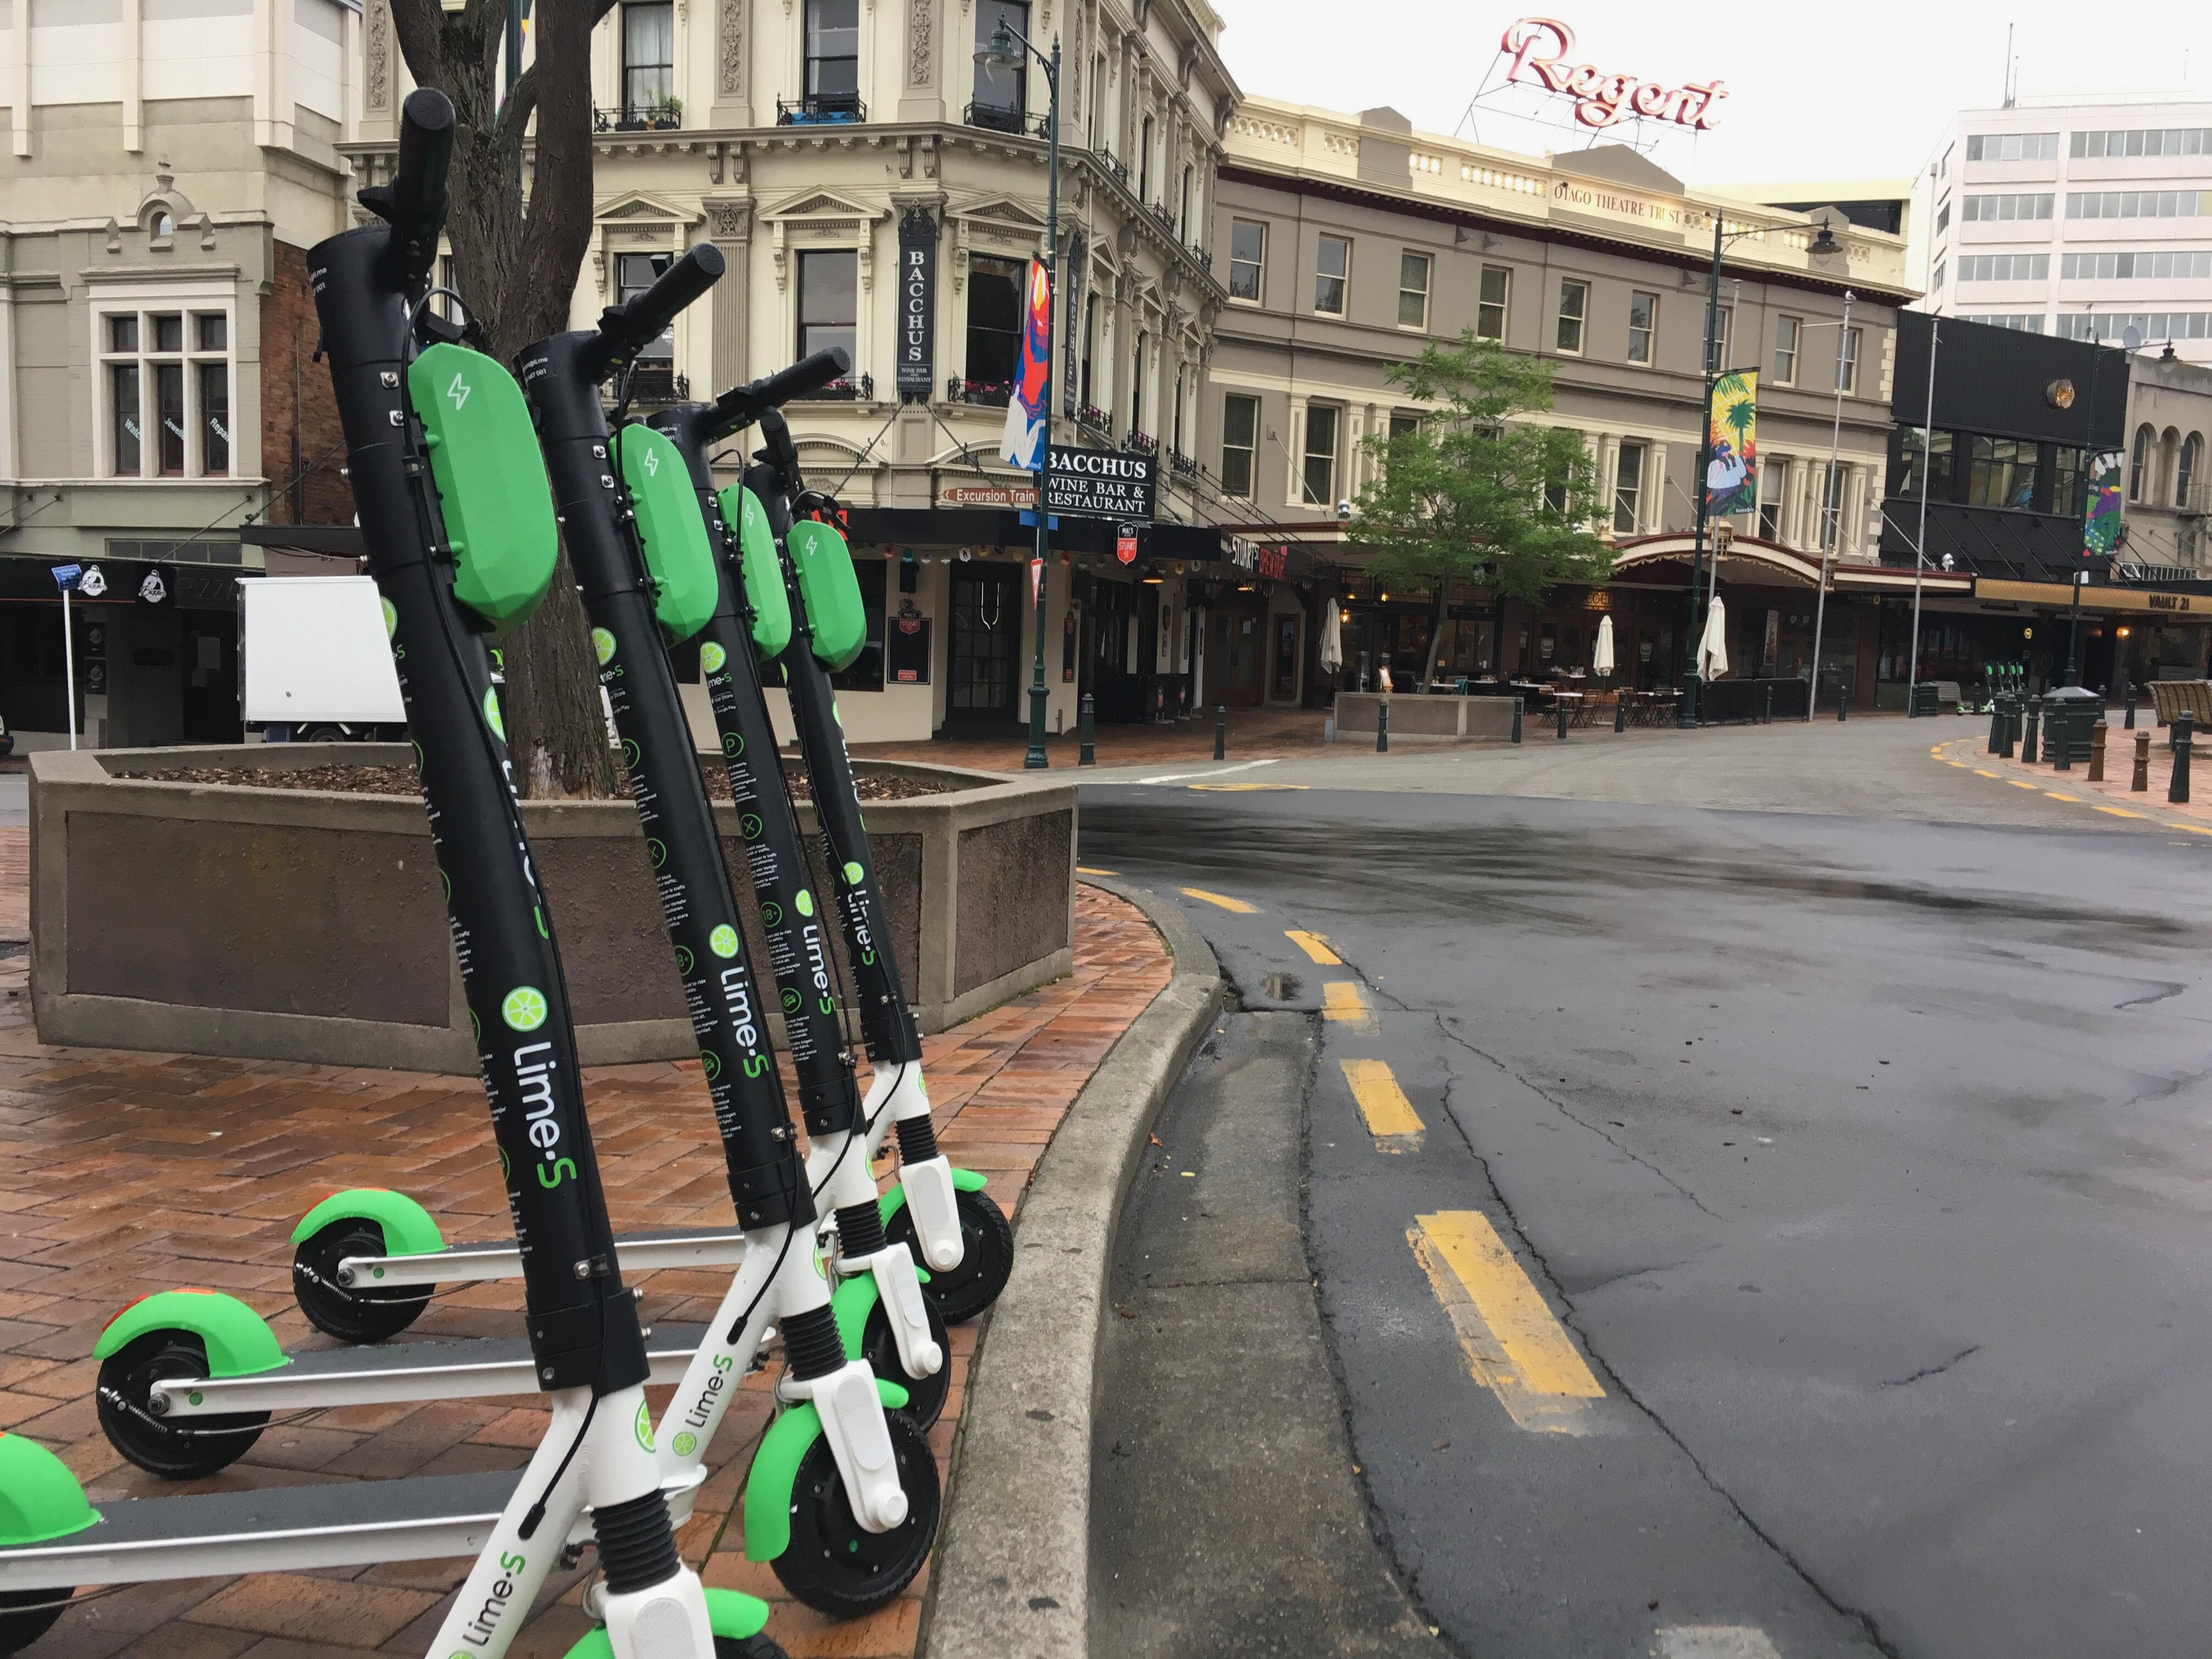 Juicers earn $7 per scooter, with a cap of 10 at any one time before they can take go out and...